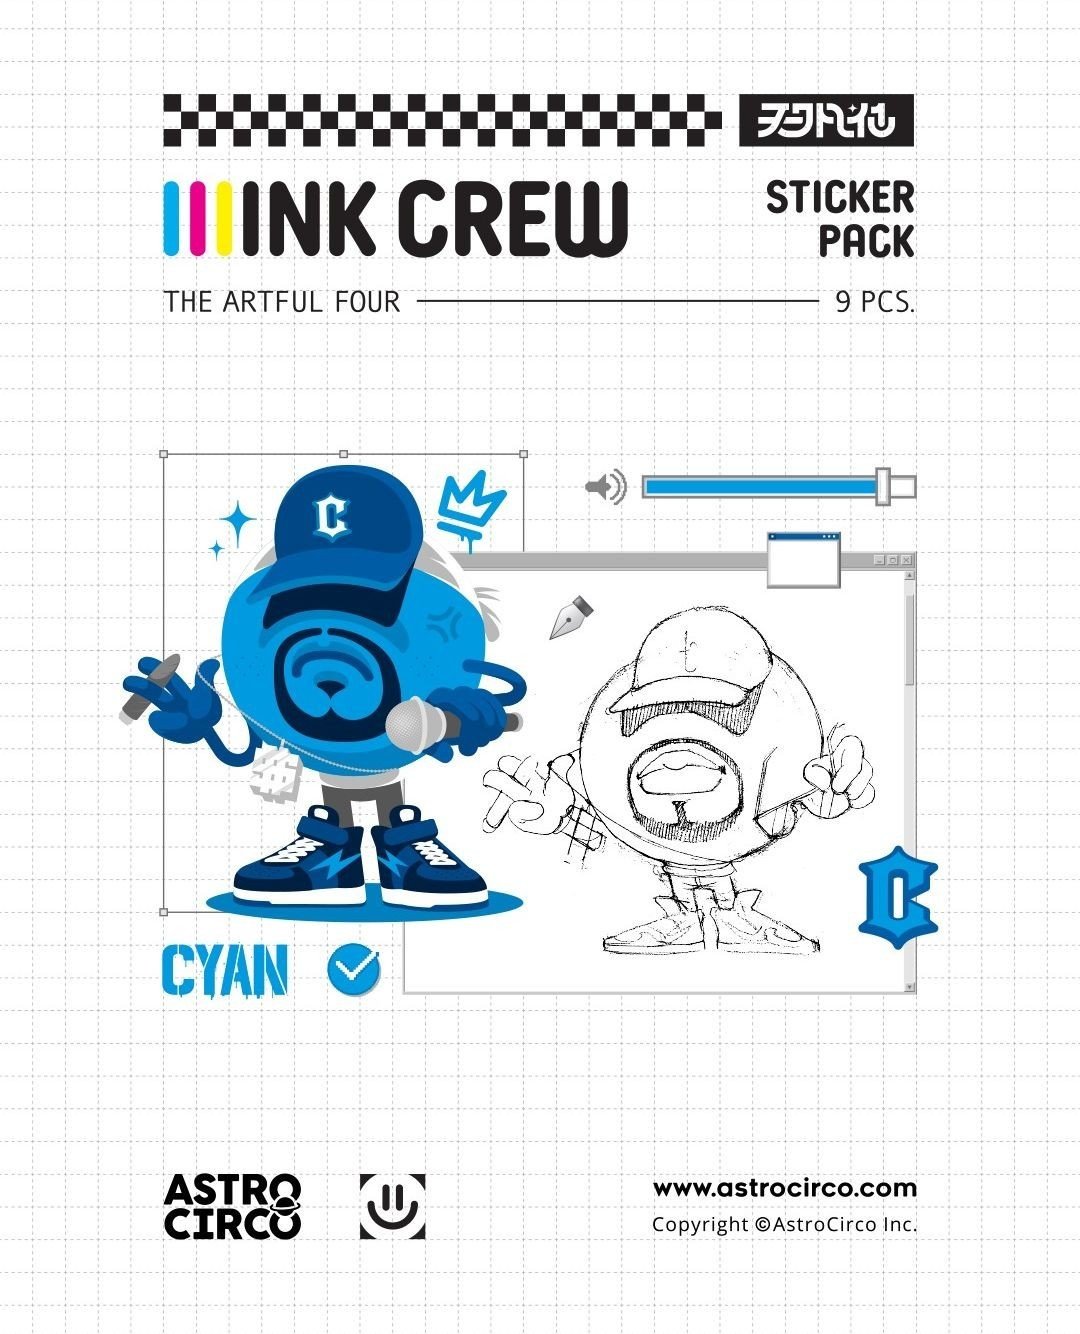 One of INK CREW characters, CYAN. ⁠
The new sticker pack is now available on our shop. ⁠
.⁠
.⁠
.⁠
#astrocircostudio #CMYK #INK #adobe #behance #graphicdesign #stickyfinger #spider #digitalillustration #ipaddrawing #stickers